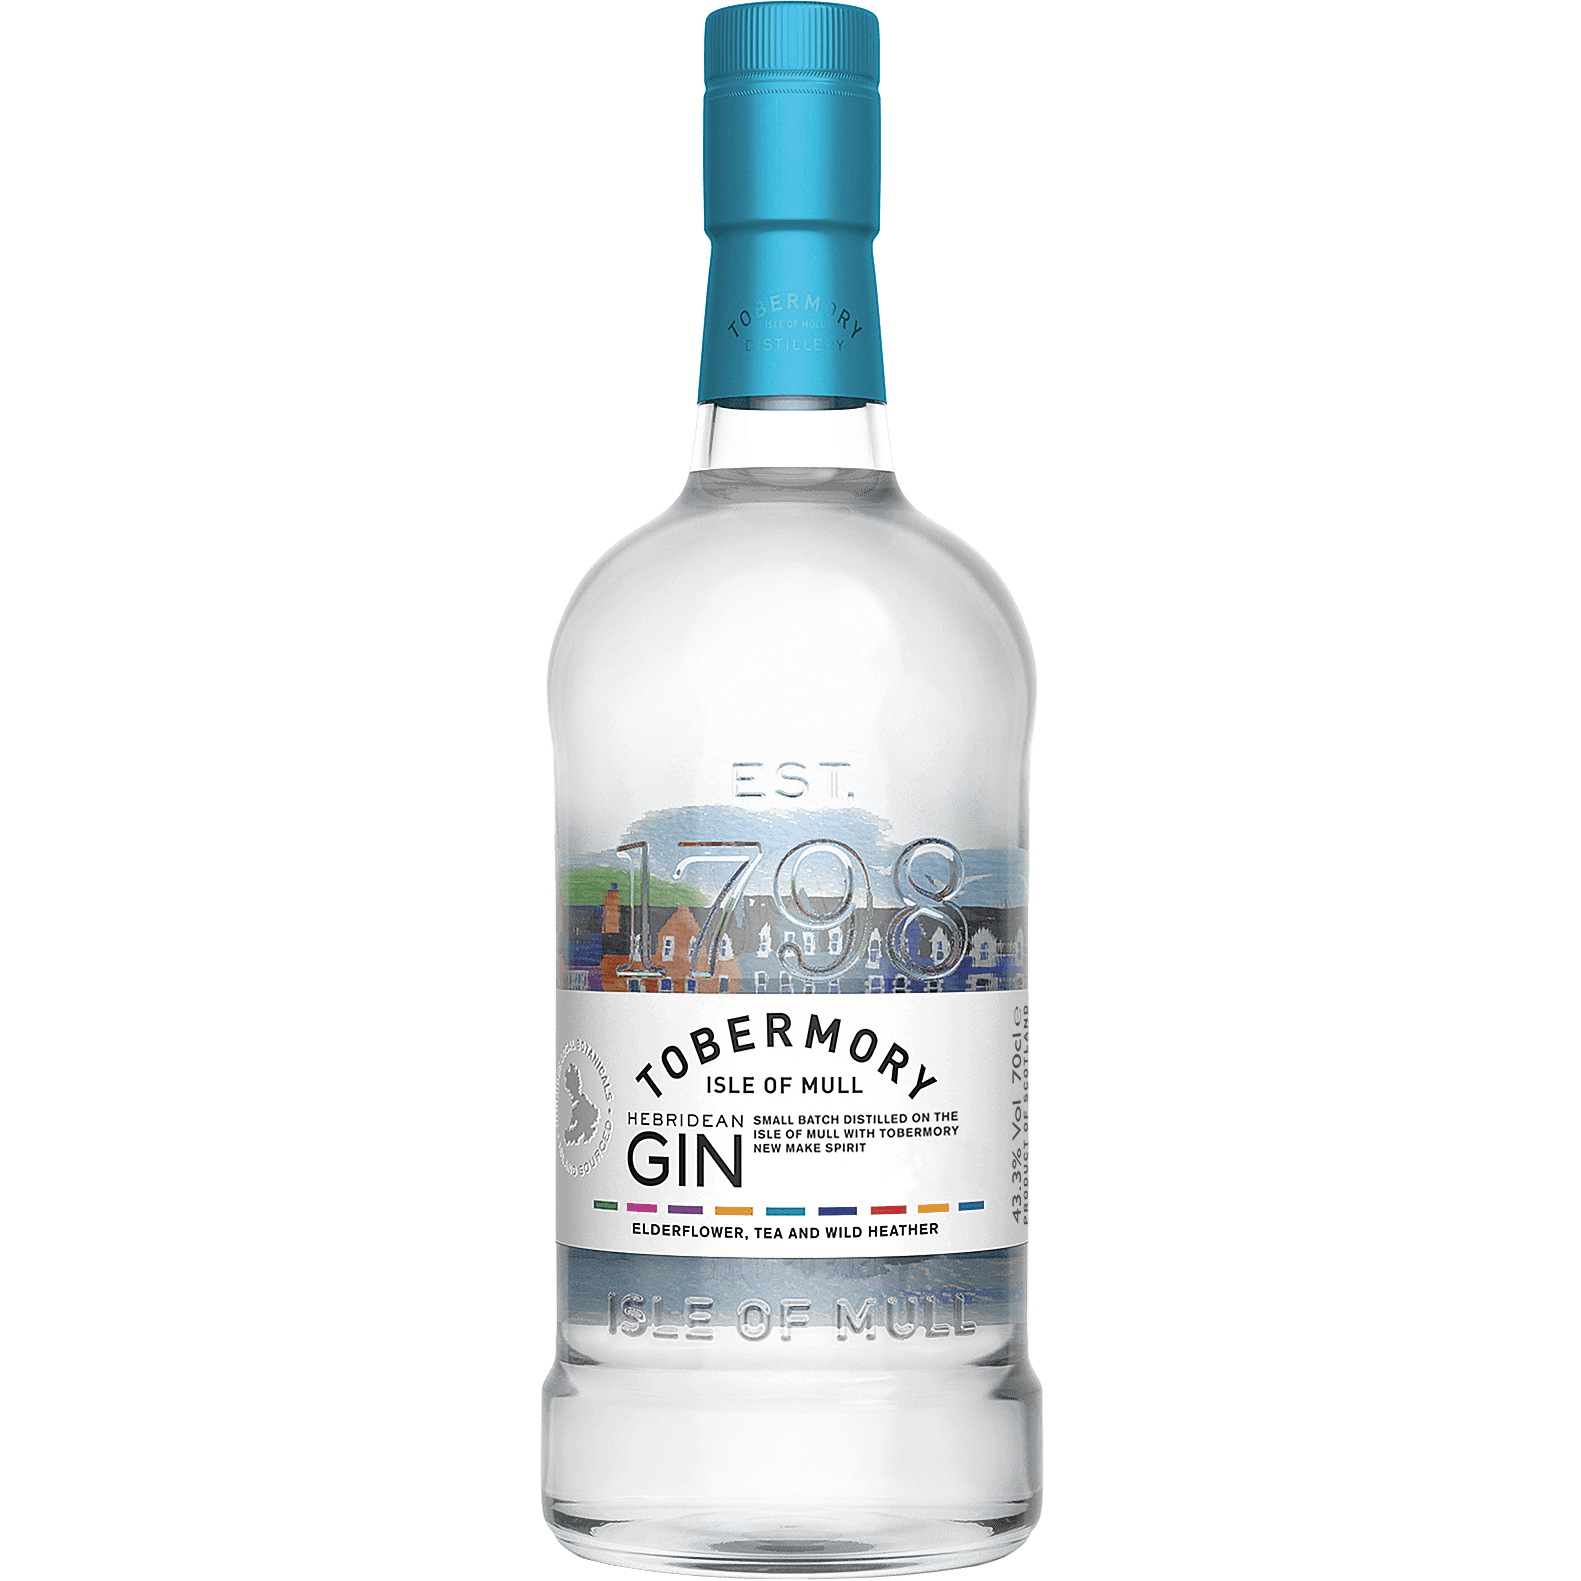 Tobermory (Isle of Mull) Hebridean Gin (1x70cl) - TwoMoreGlasses.com